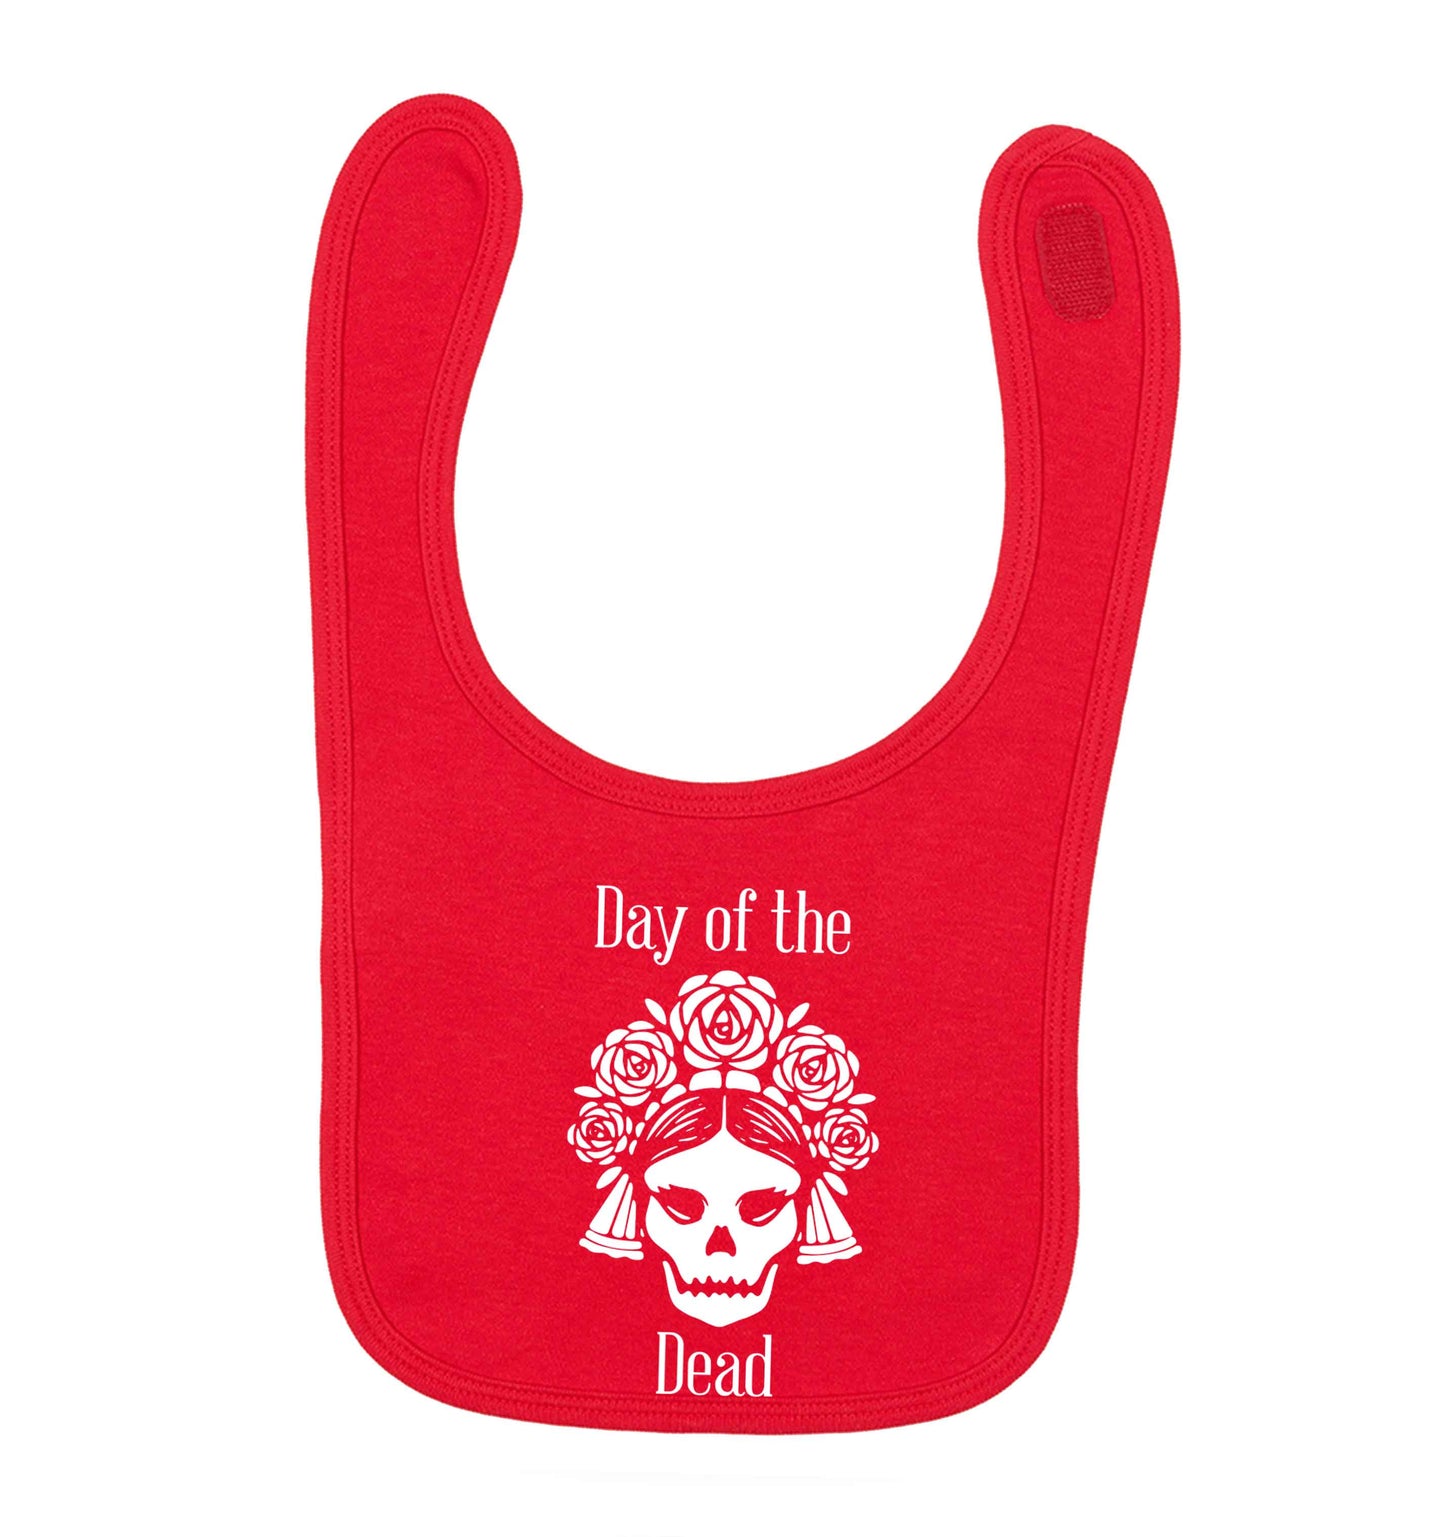 Day of the dead red baby bib